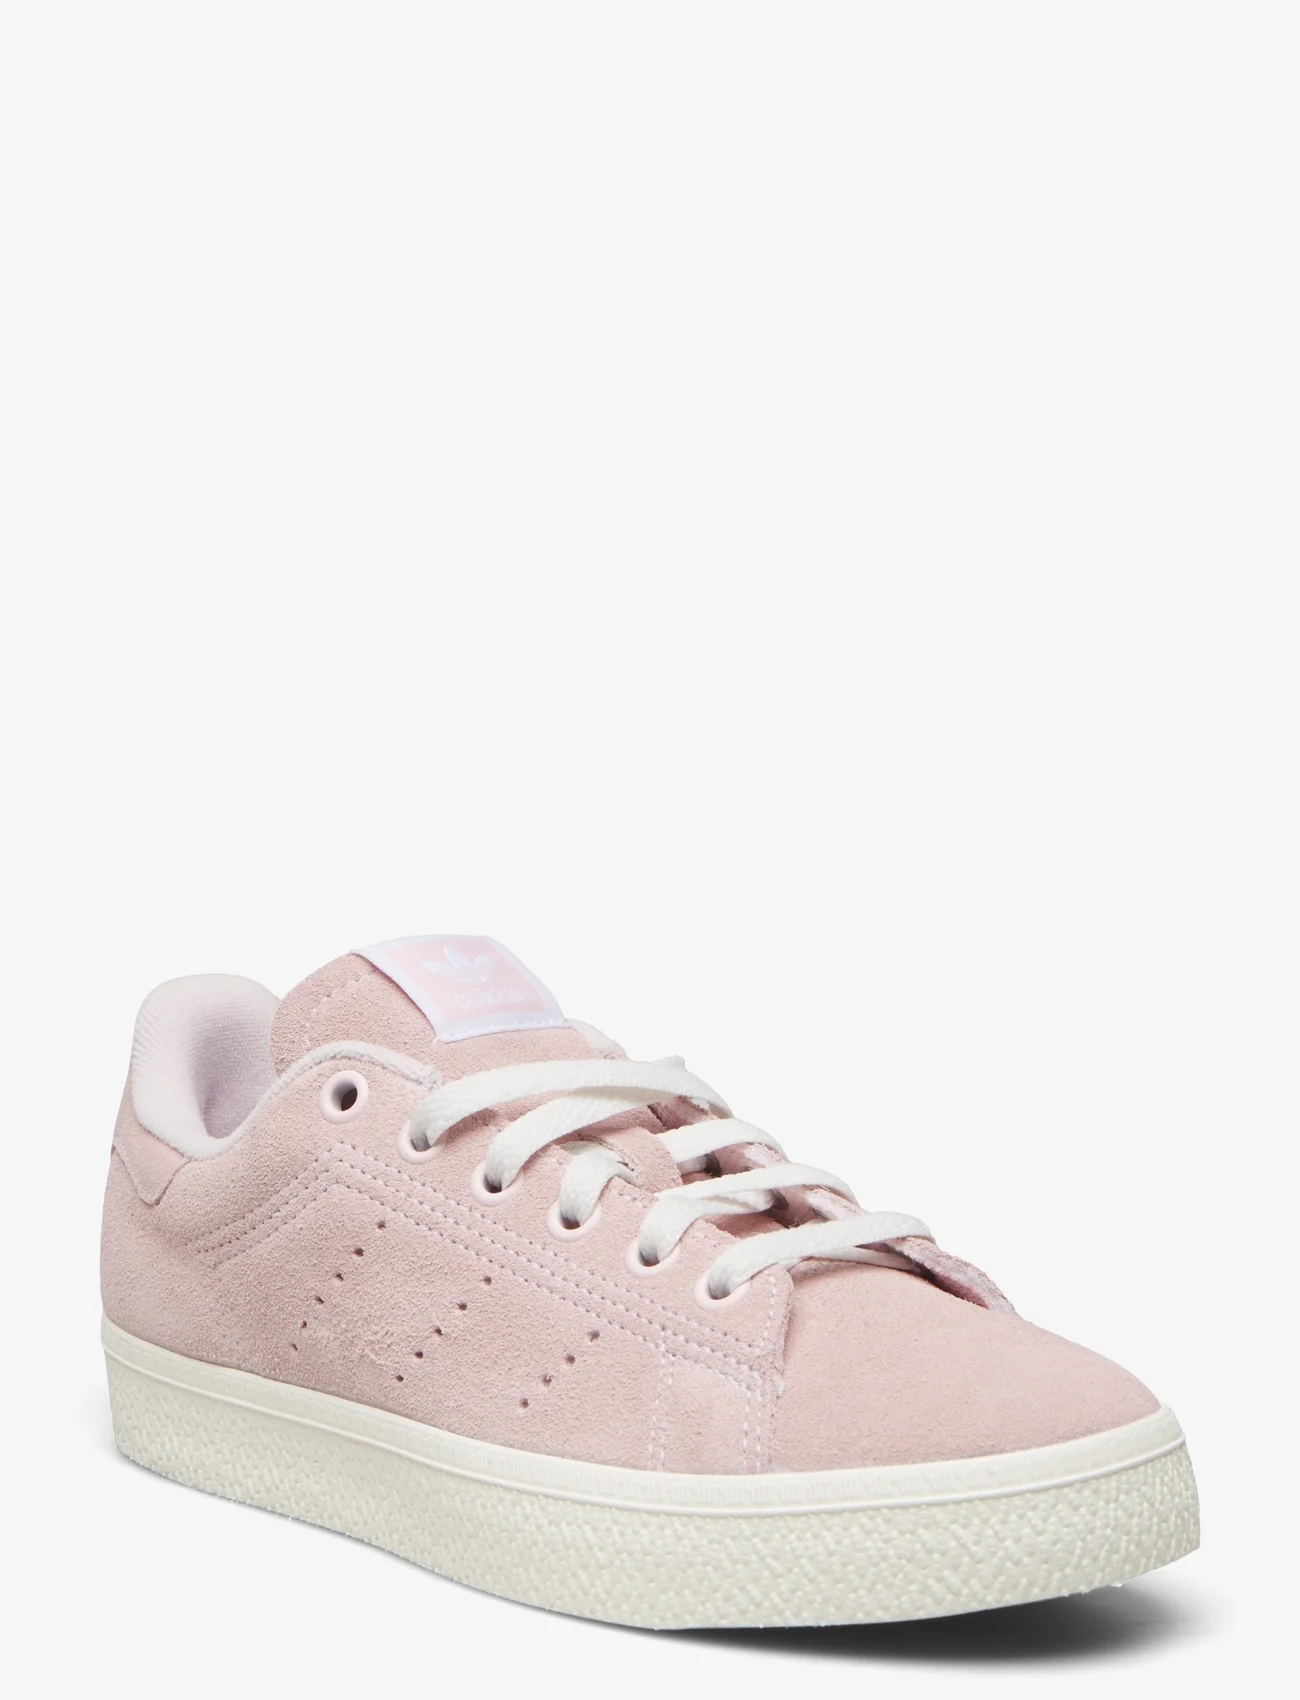 adidas Originals - STAN SMITH CS W - lage sneakers - clpink/ftwwht/cwhite - 0